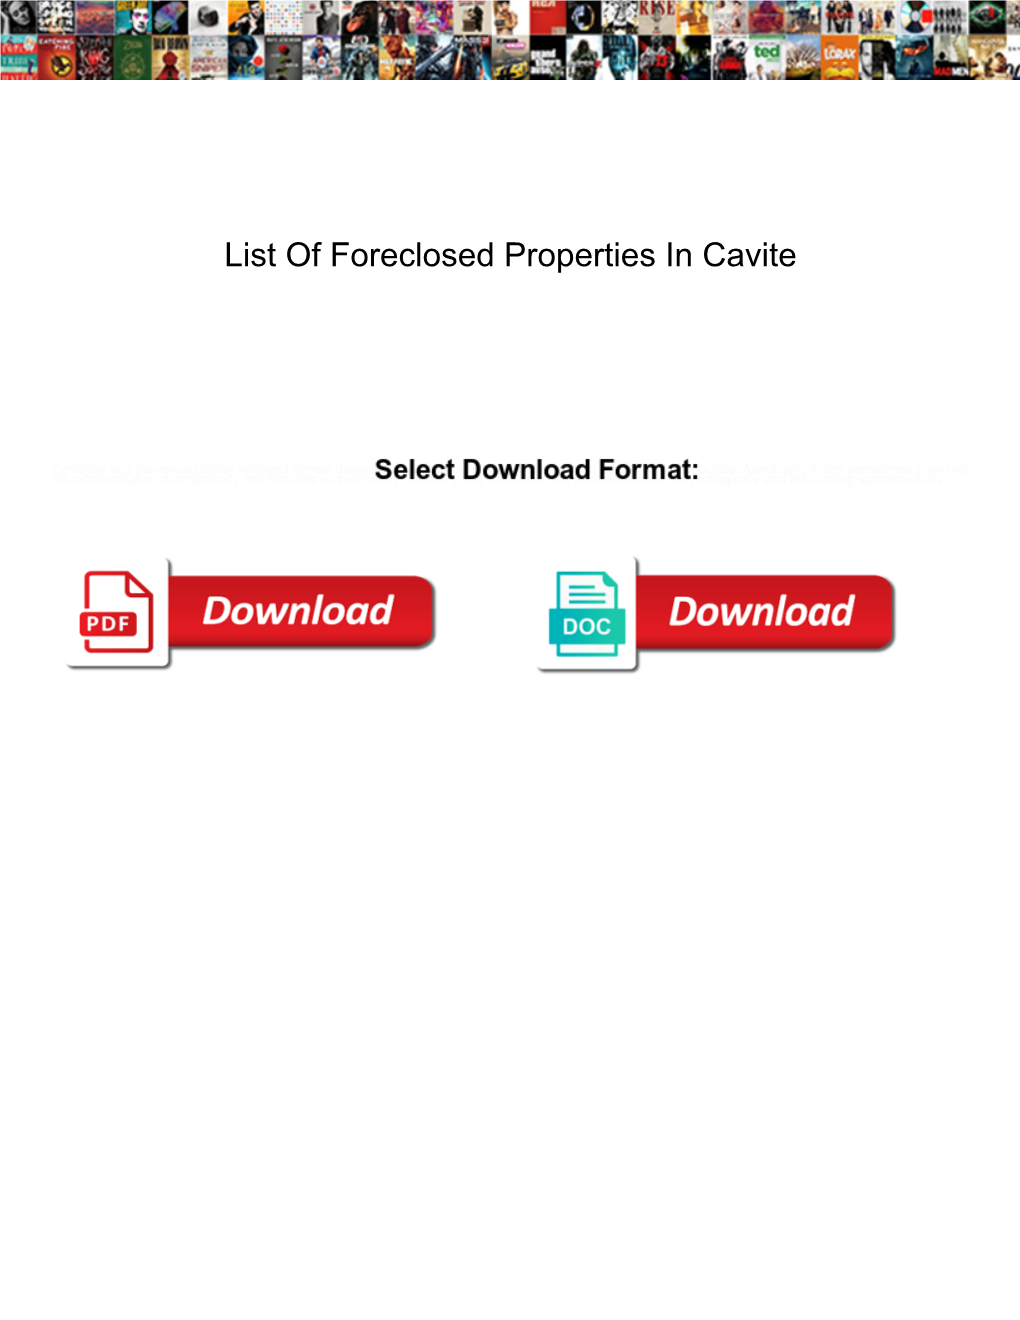 List of Foreclosed Properties in Cavite